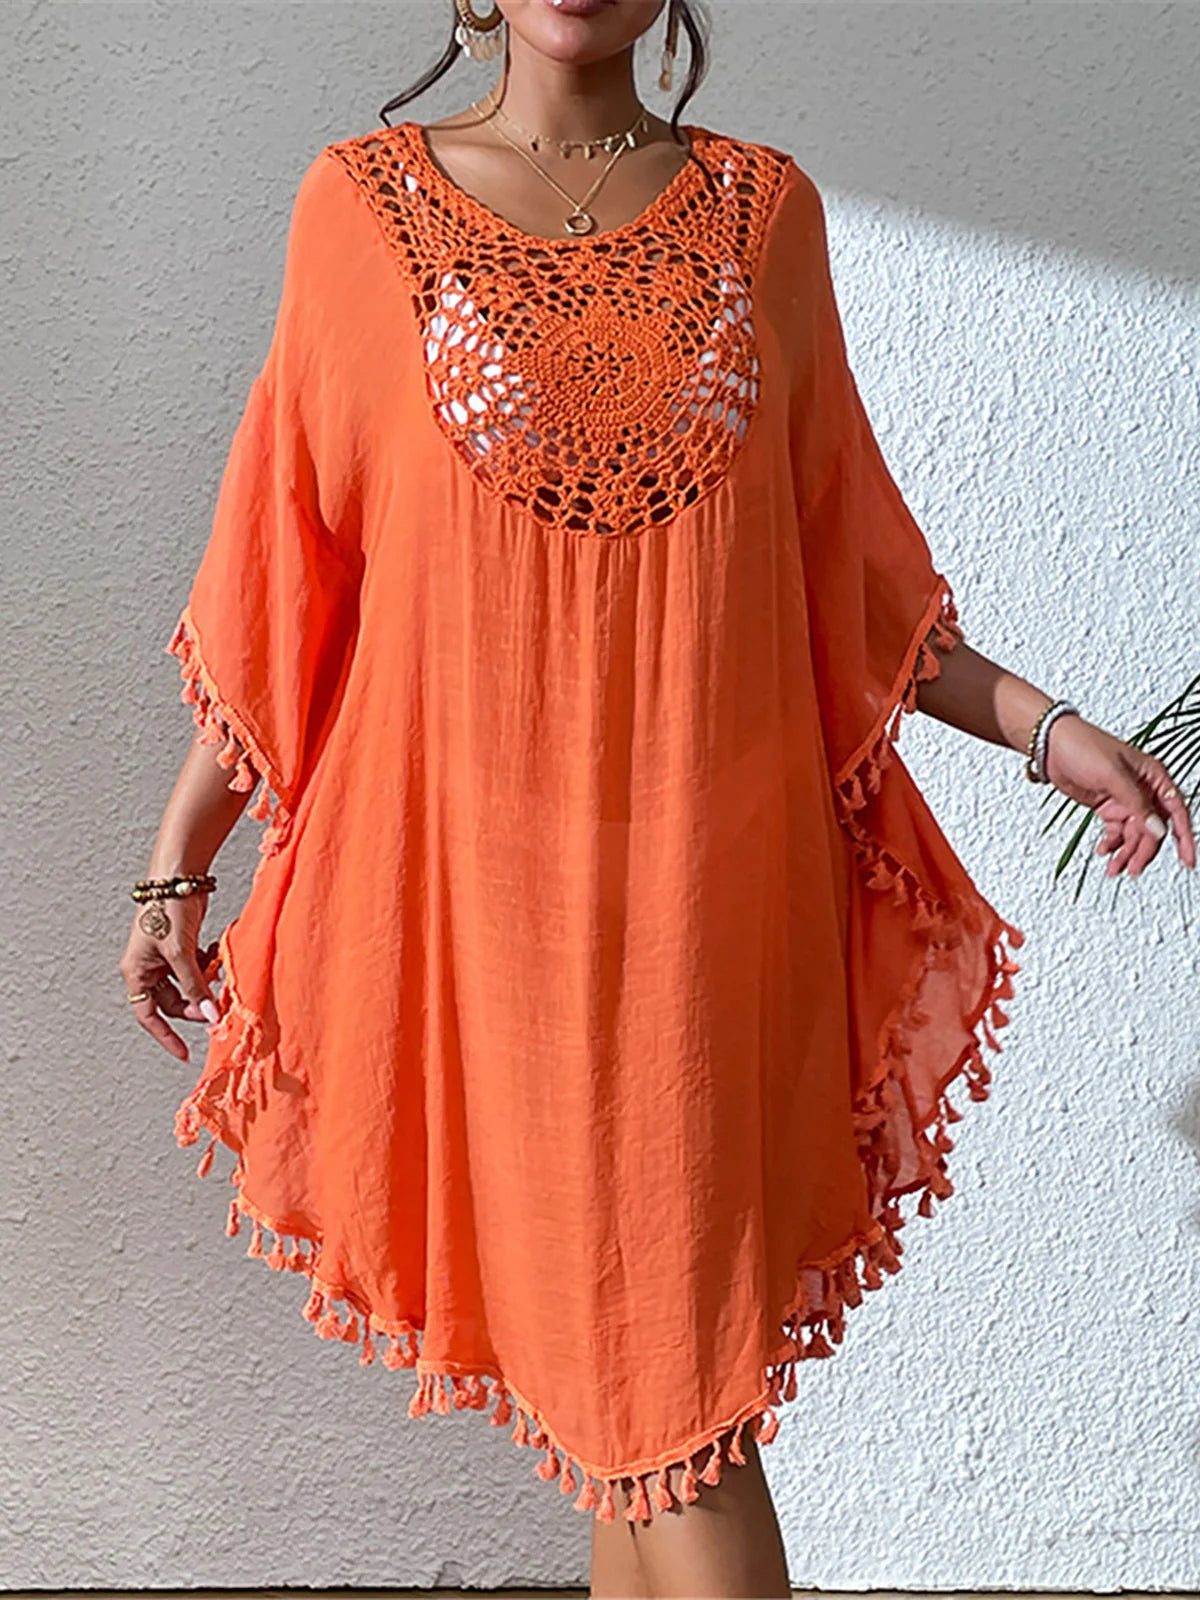 Fringe Tassel Embroidery Beach Cover-Up for women. Bohemian style tunic featuring half sleeves and long beach dress design. Made of nylon, polyester, rayon, and cotton. Fits true to size in sizes S, M, L, perfect for adults aged 18-35. This product is in stock with free shipping and available in orange, white, and black colors.